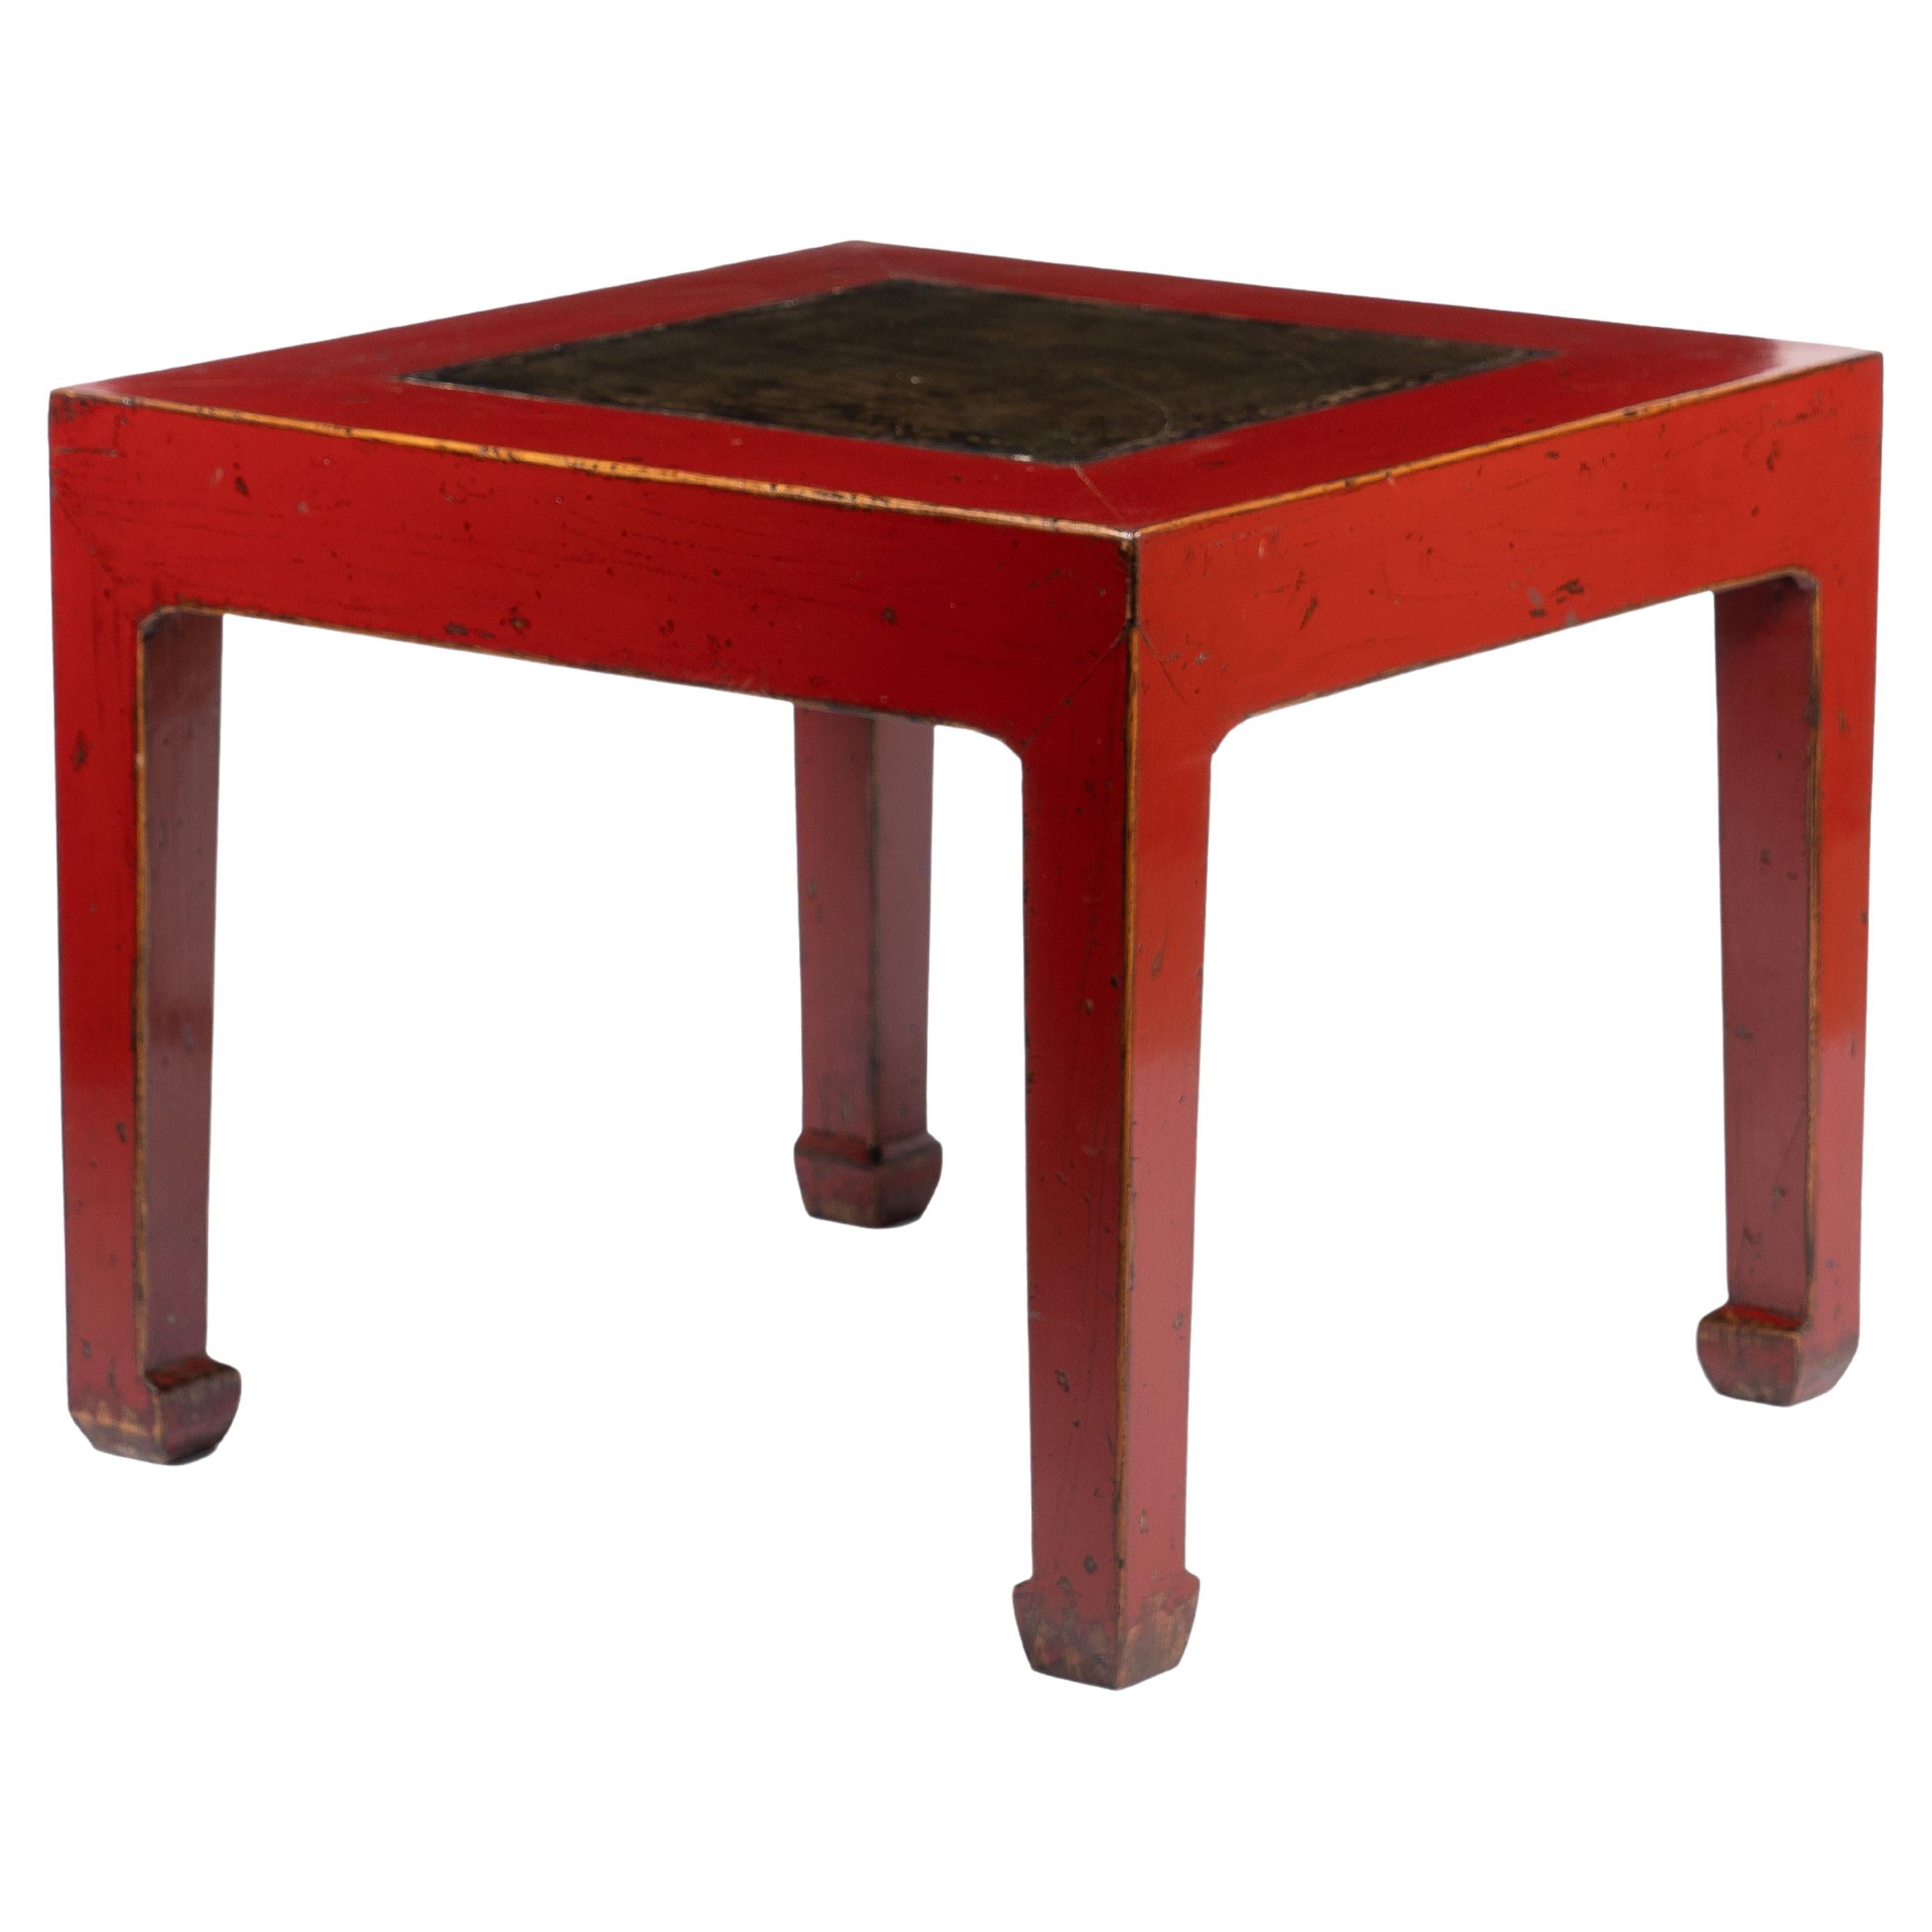 Chinese Red Lacquered Square Table Fitted with Inset Stone Top, 1900